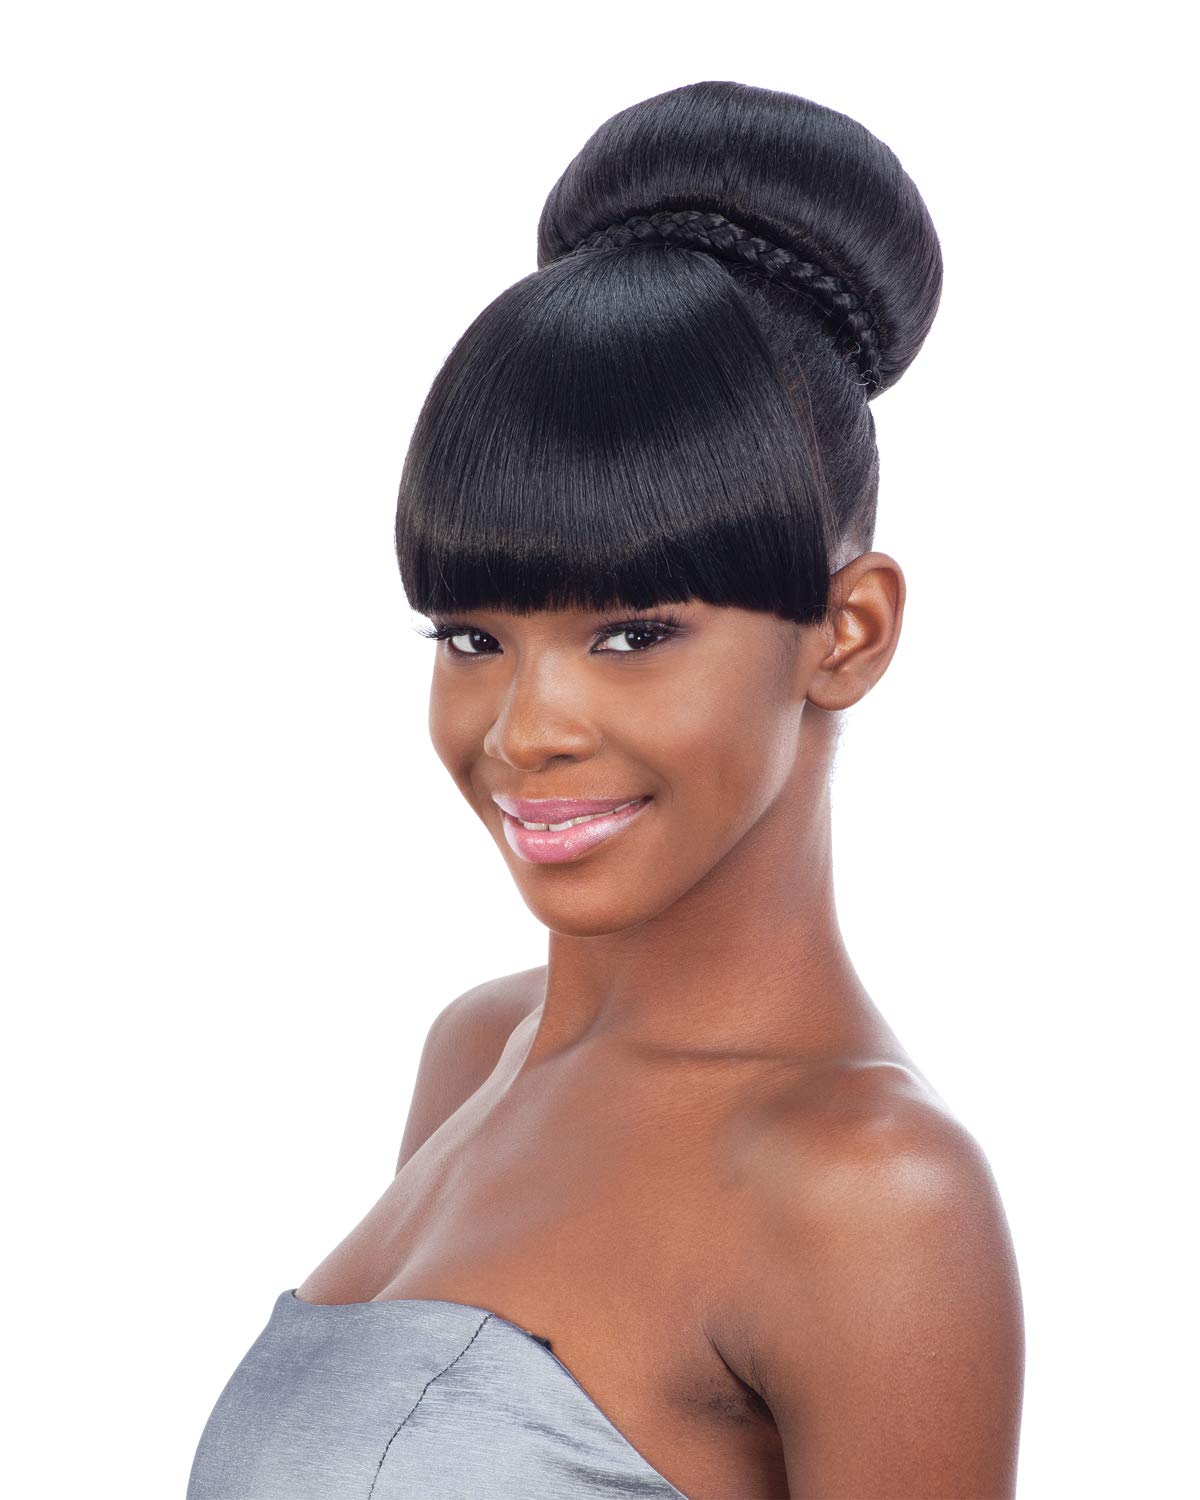 MOD BANG (1B Off Black) - Freetress Equal Synthetic Clip-In Hair Piece Find Your New Look Today!